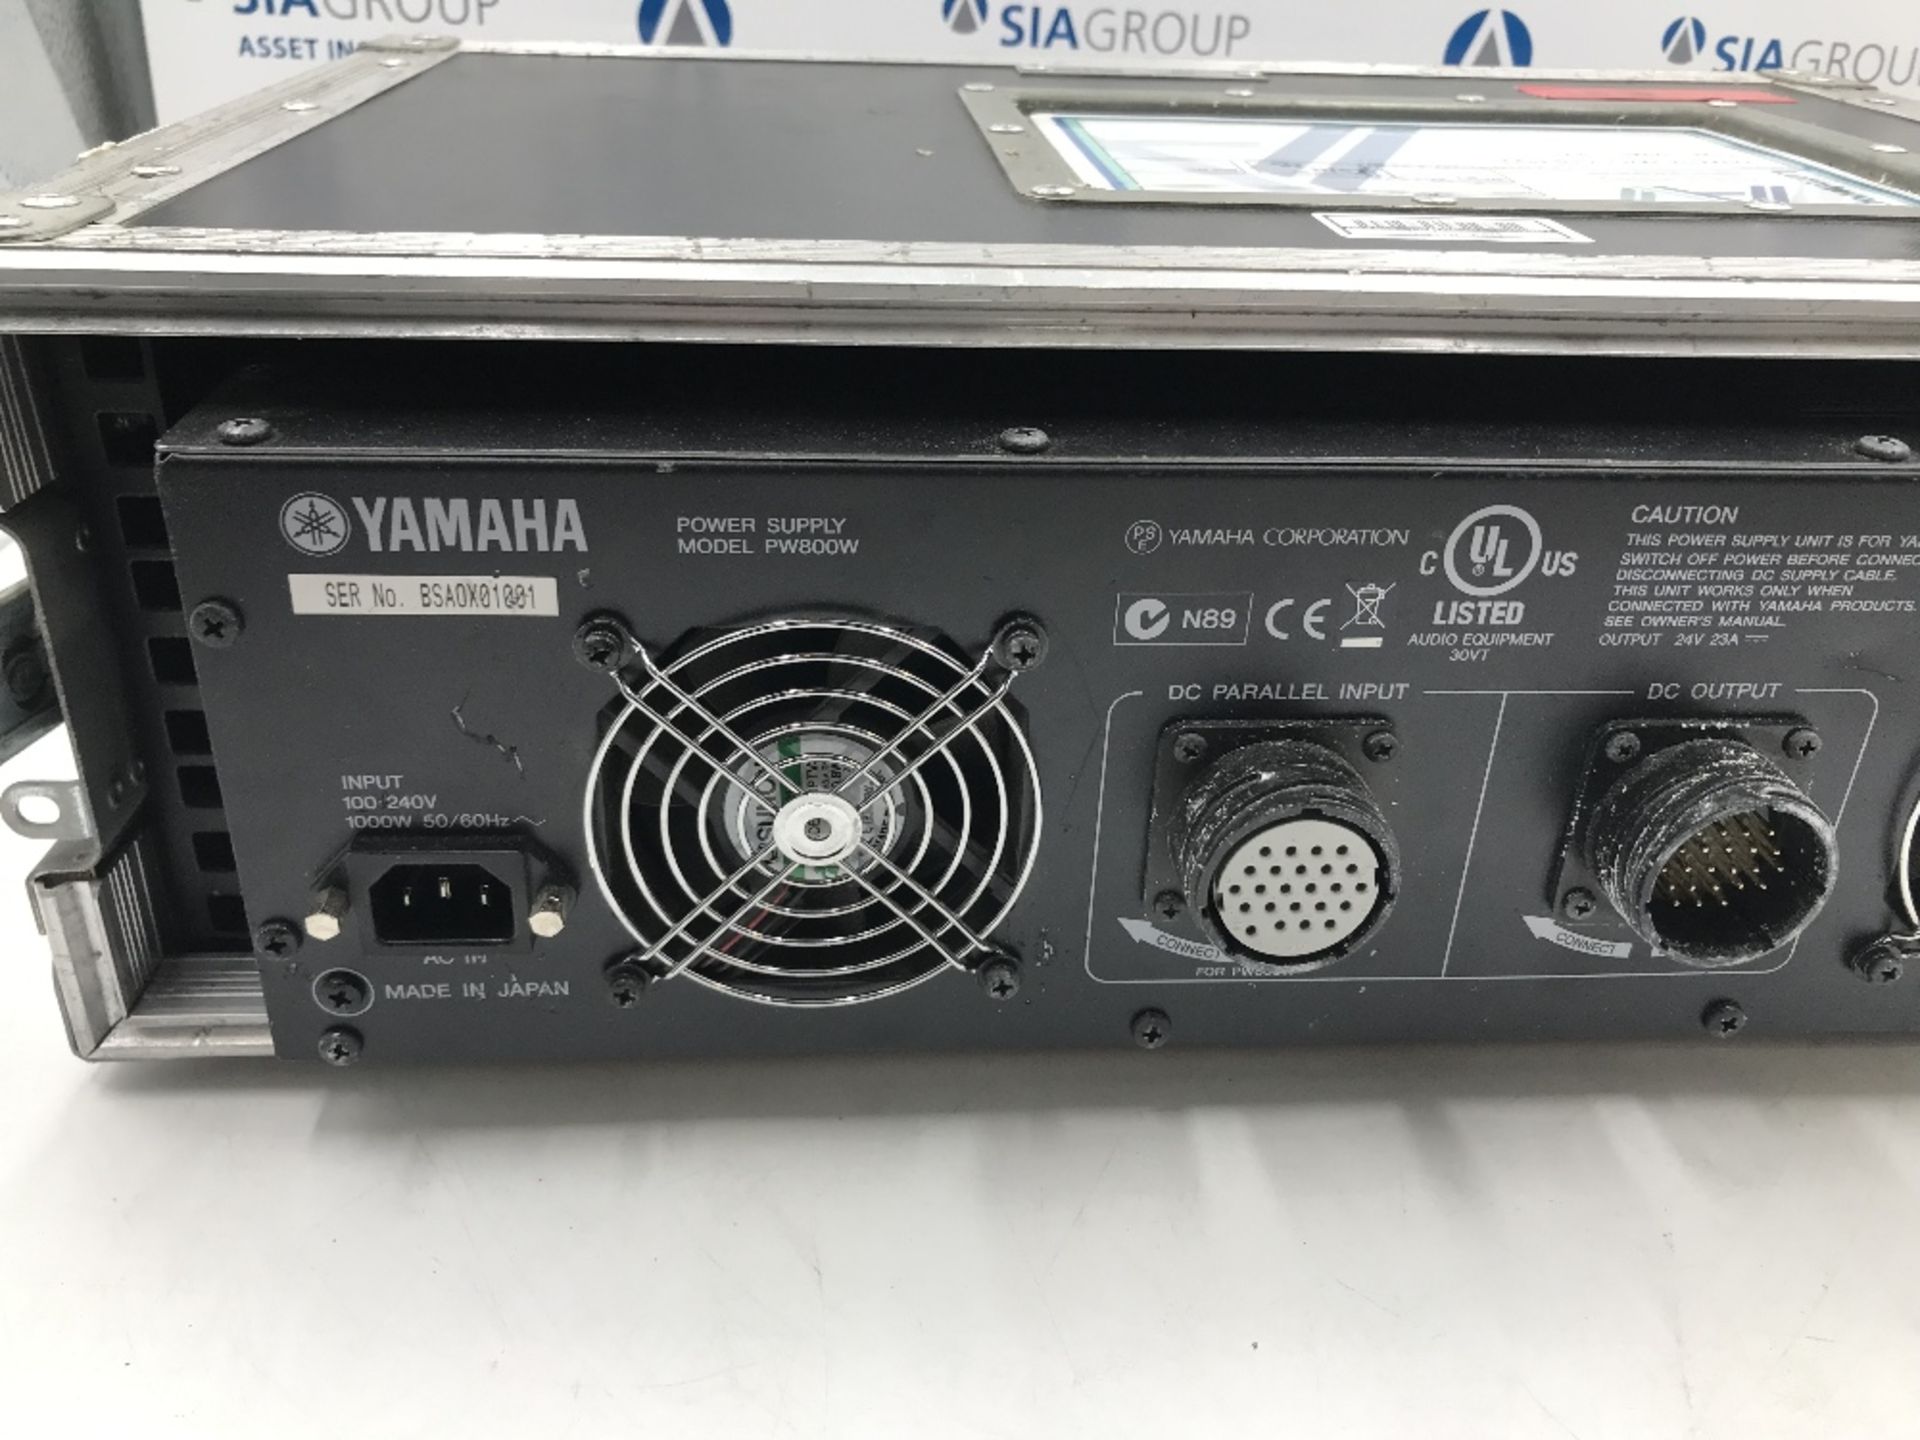 Yamaha PW800W Power Supply Housed In Heavy Duty Carry Case - Image 2 of 5